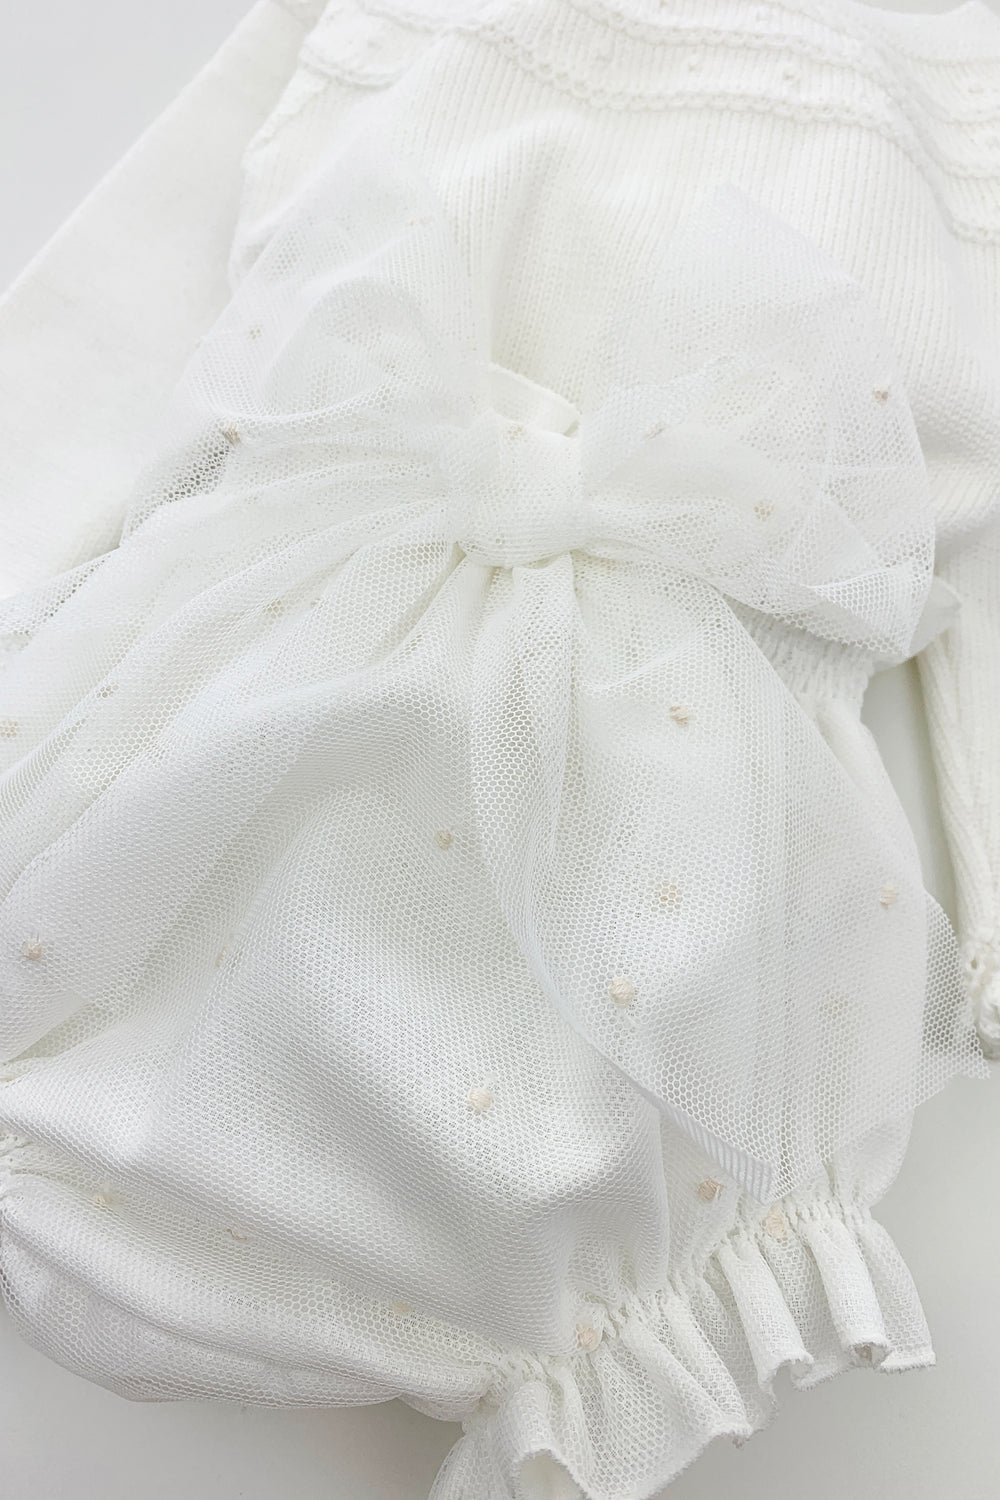 Granlei "Flora" Ivory Knit Top & Tulle Bow Bloomers | Millie and John